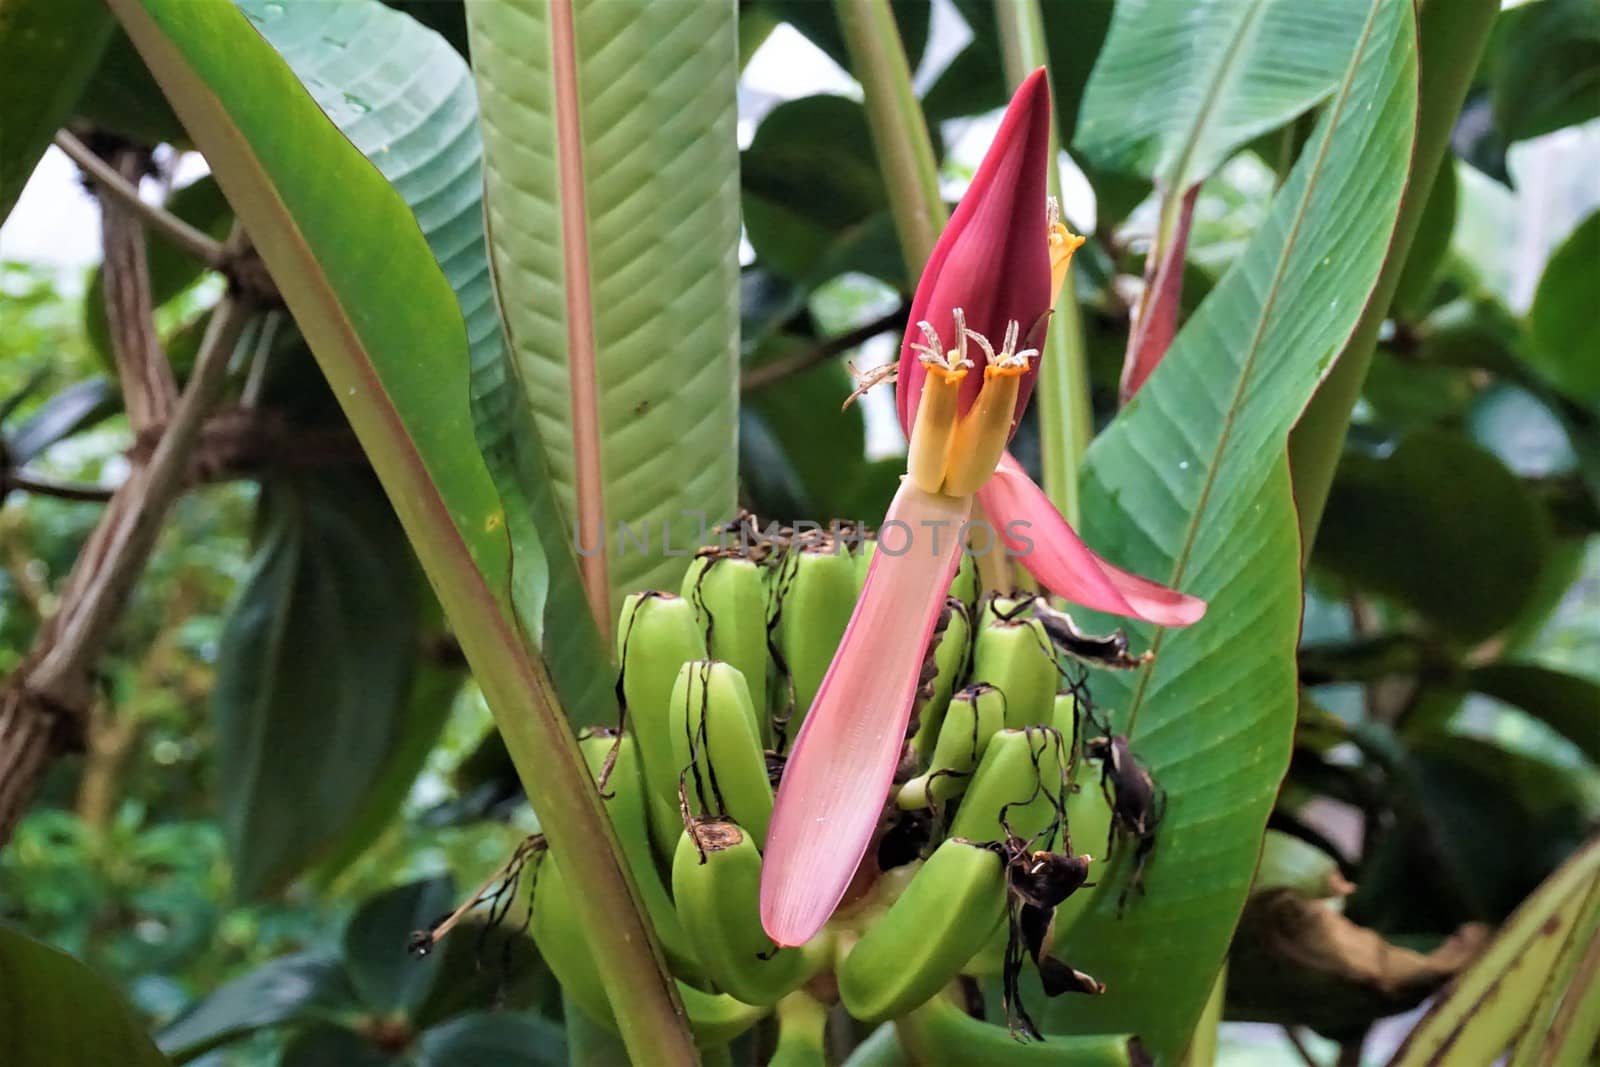 Blossom and fruits of a banana tree by pisces2386